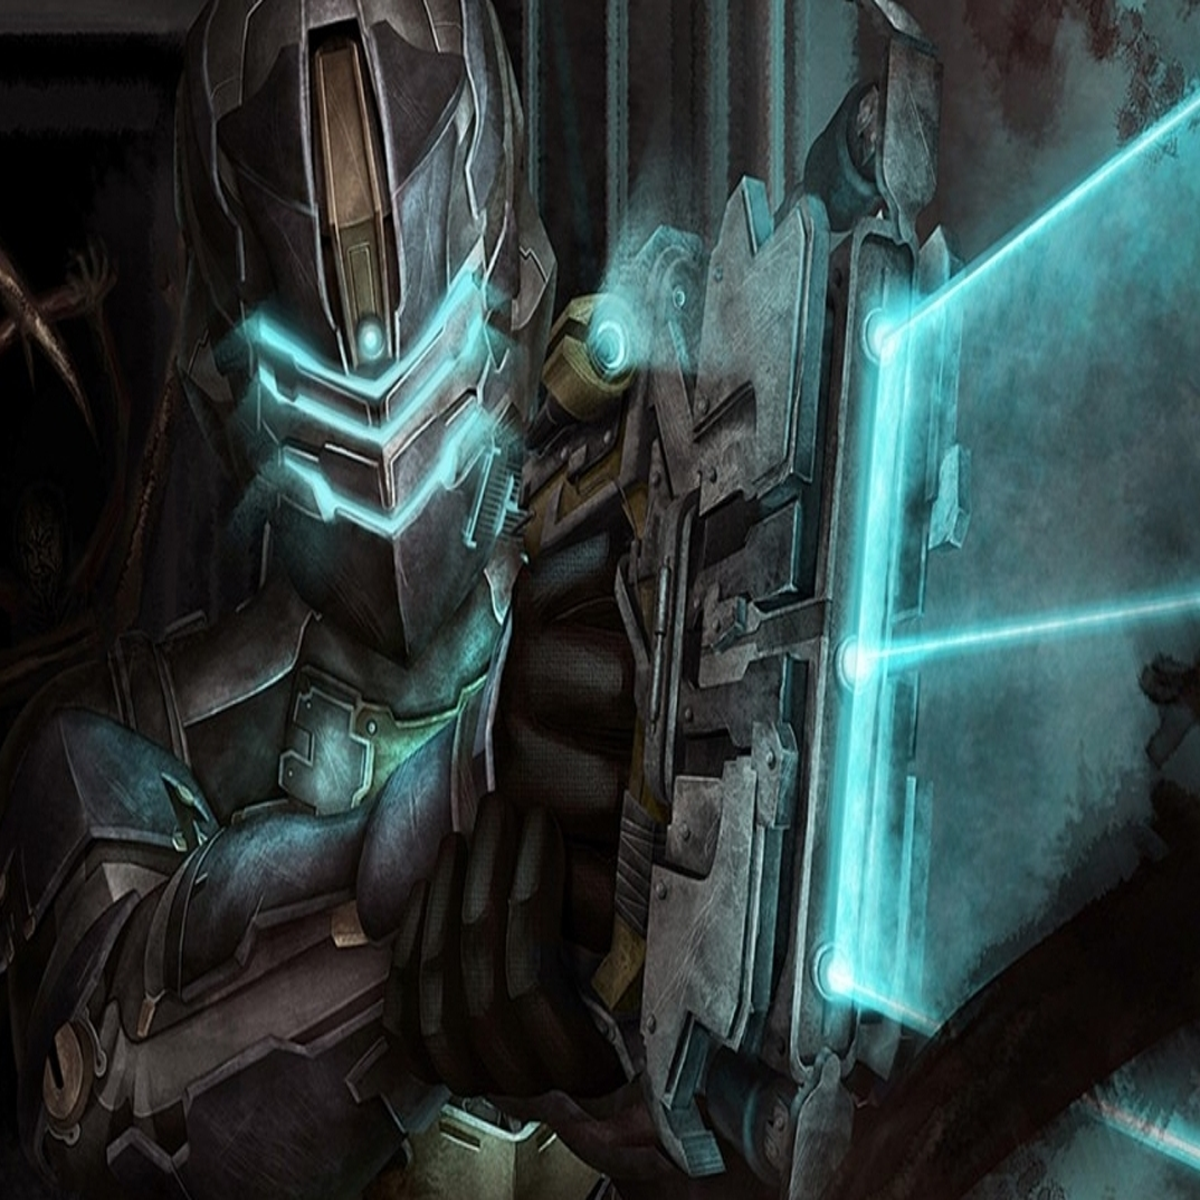 Dead Space 3 Review - IGN